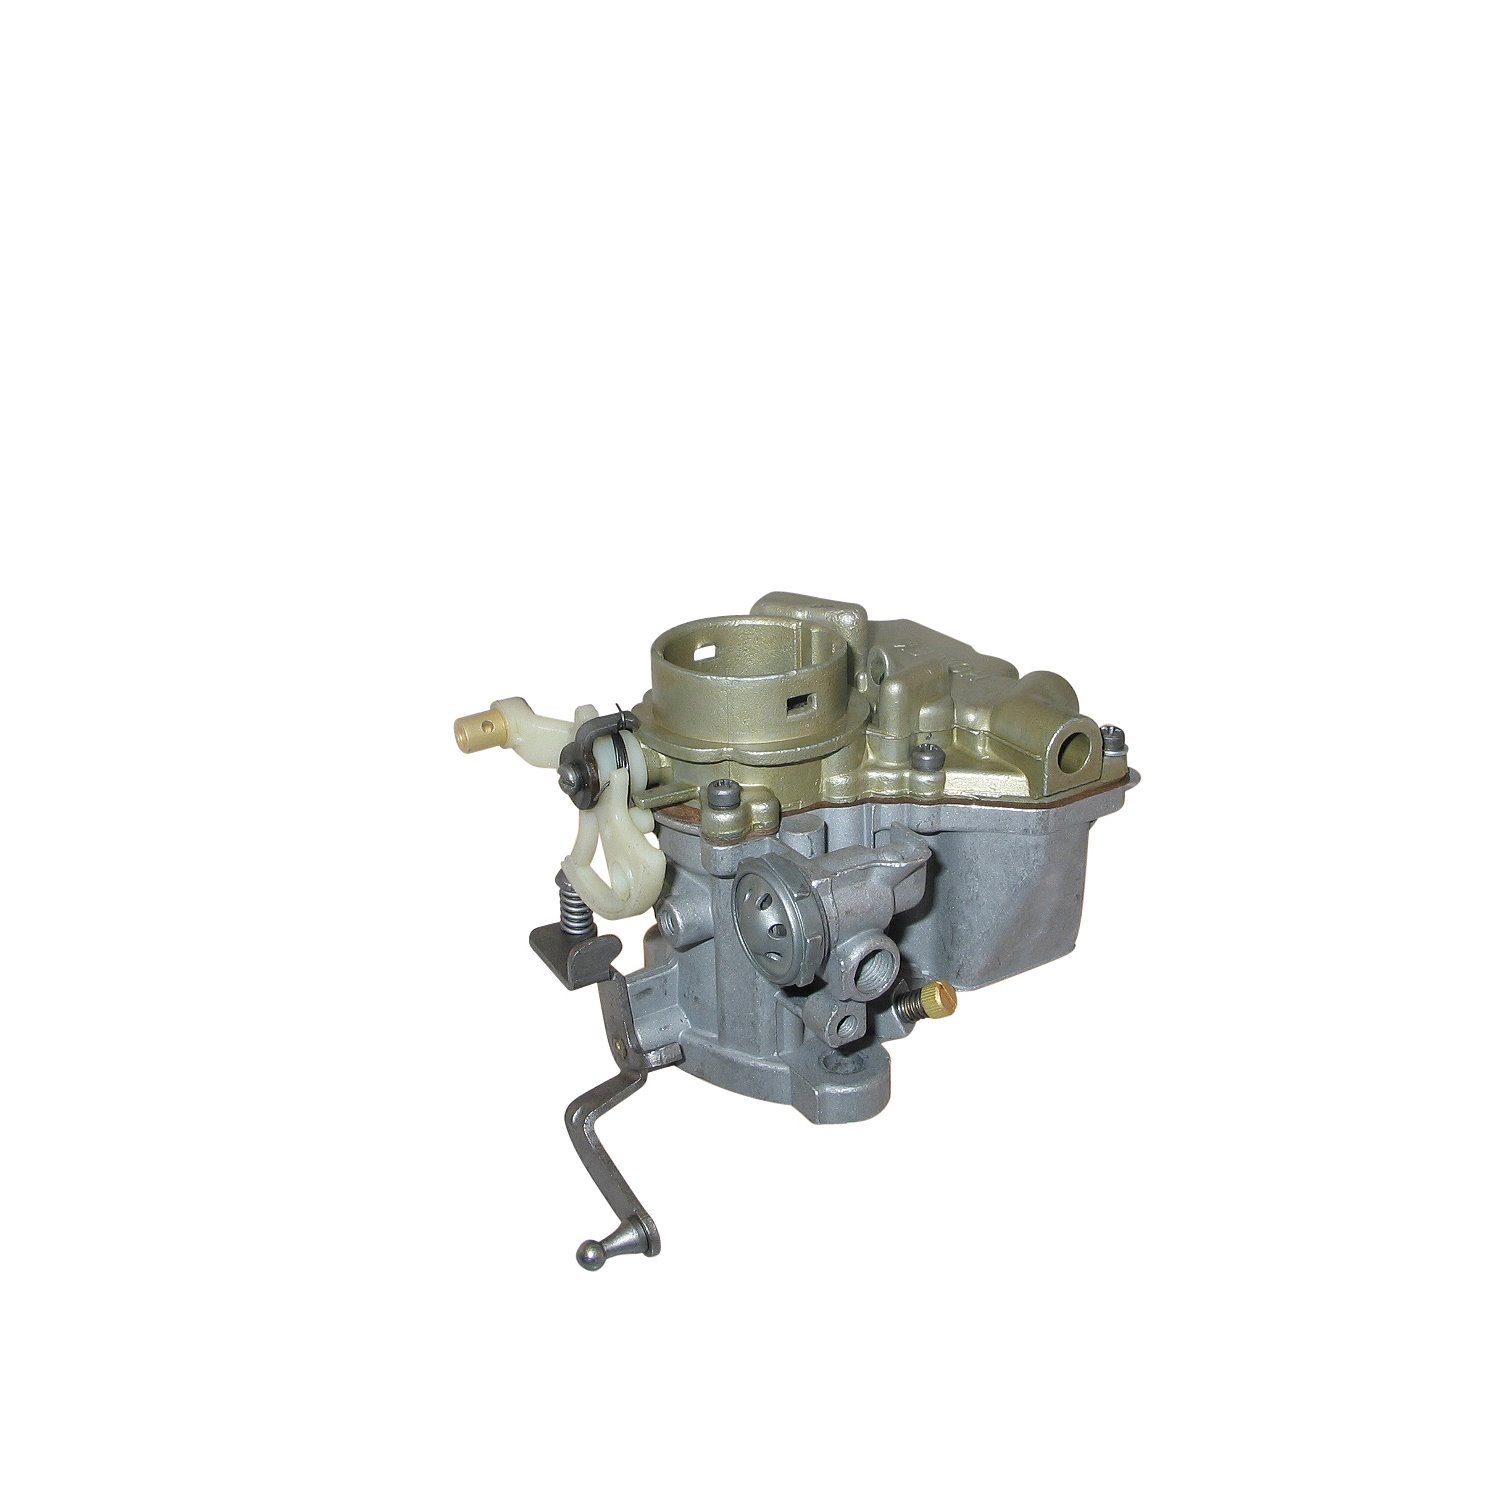 7-7131 Holley Remanufactured Carburetor, 1909-Style